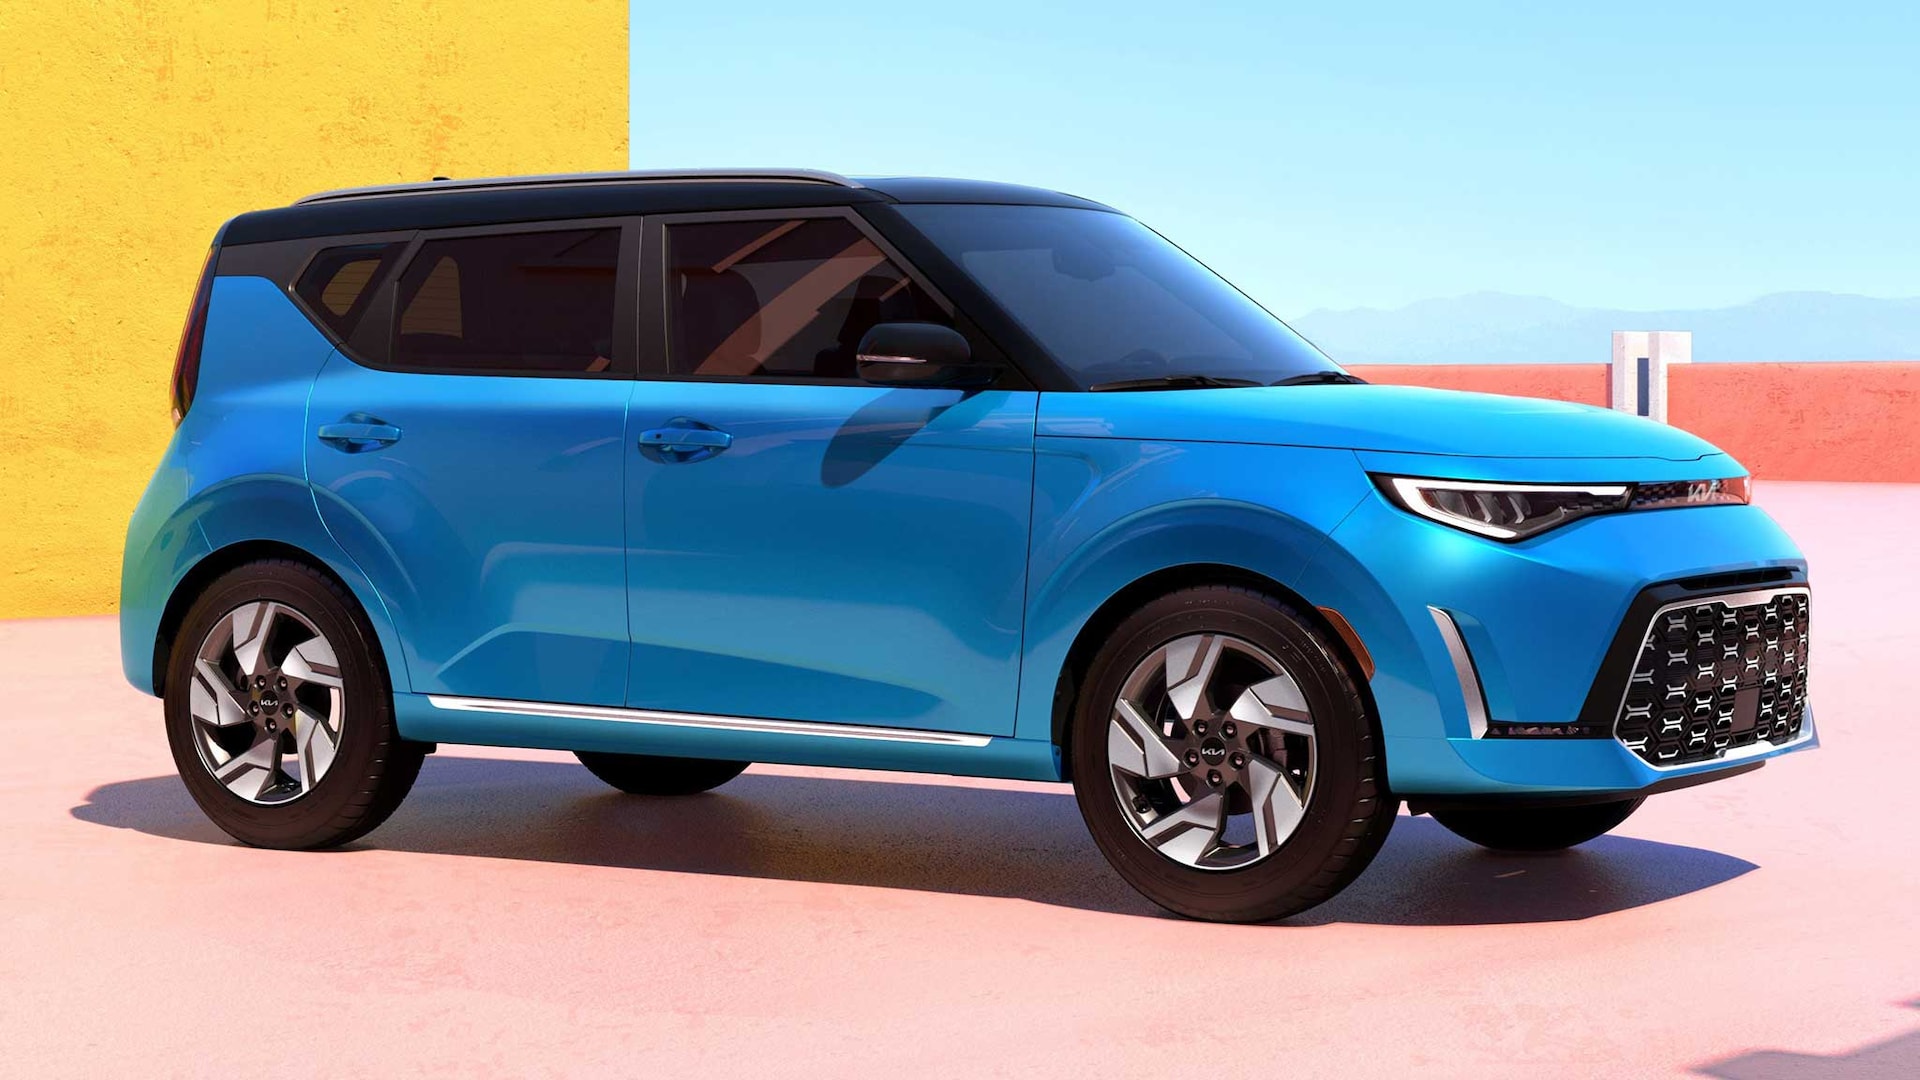 The 2023 Kia Soul Pricing Doesn't Change Much, but You Have Fewer Options